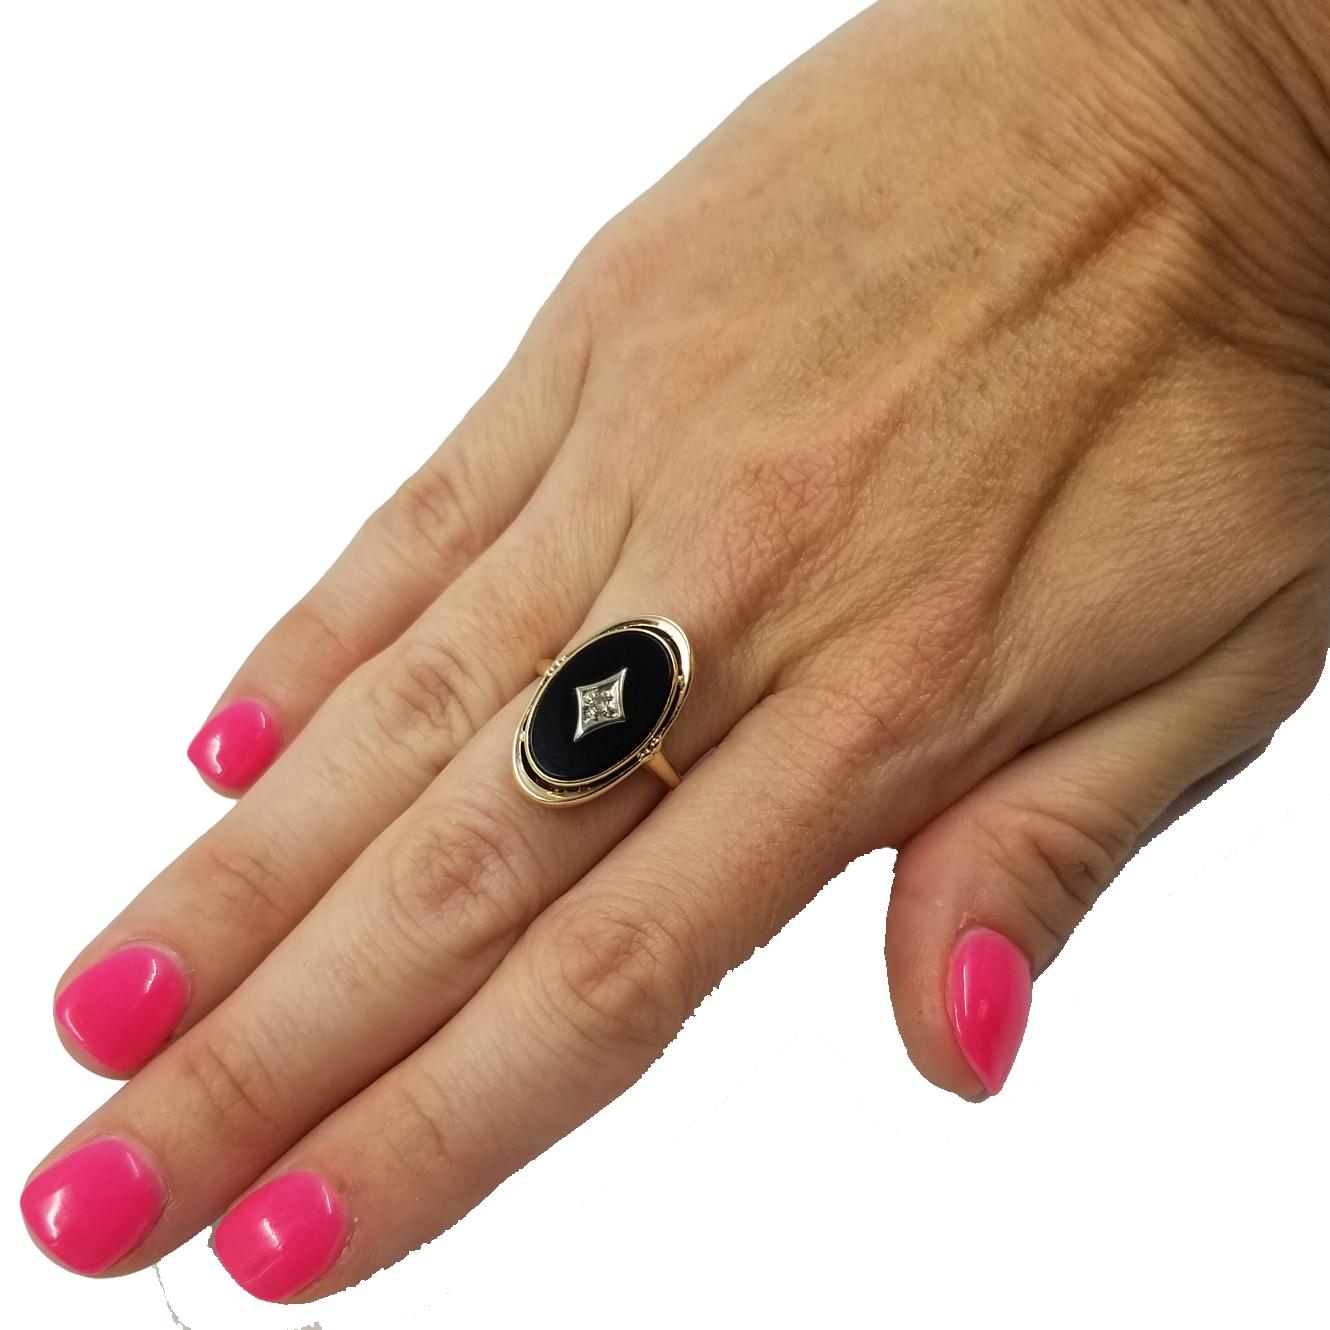 14 Karat Yellow Gold Ring Featuring An Oval Onyx & Small Round Diamond. Finished Weight is 2.7 Grams. Finger Size is Currently 6.75; Purchase Includes One Free Sizing.